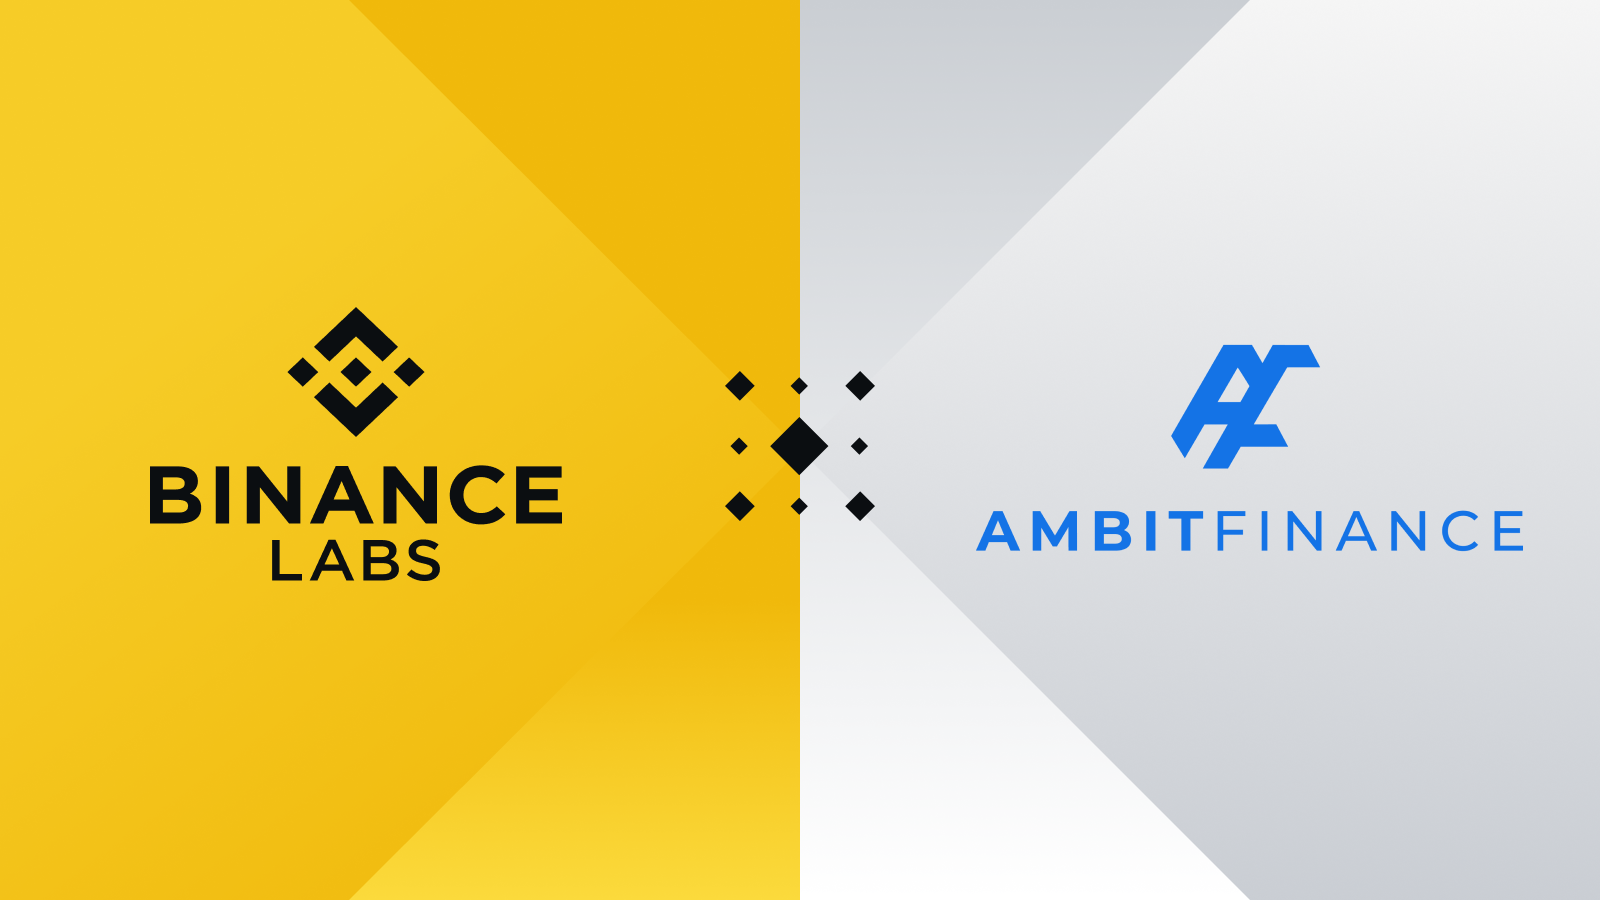 6 projects Binance has partnered with in the last 30 days 1